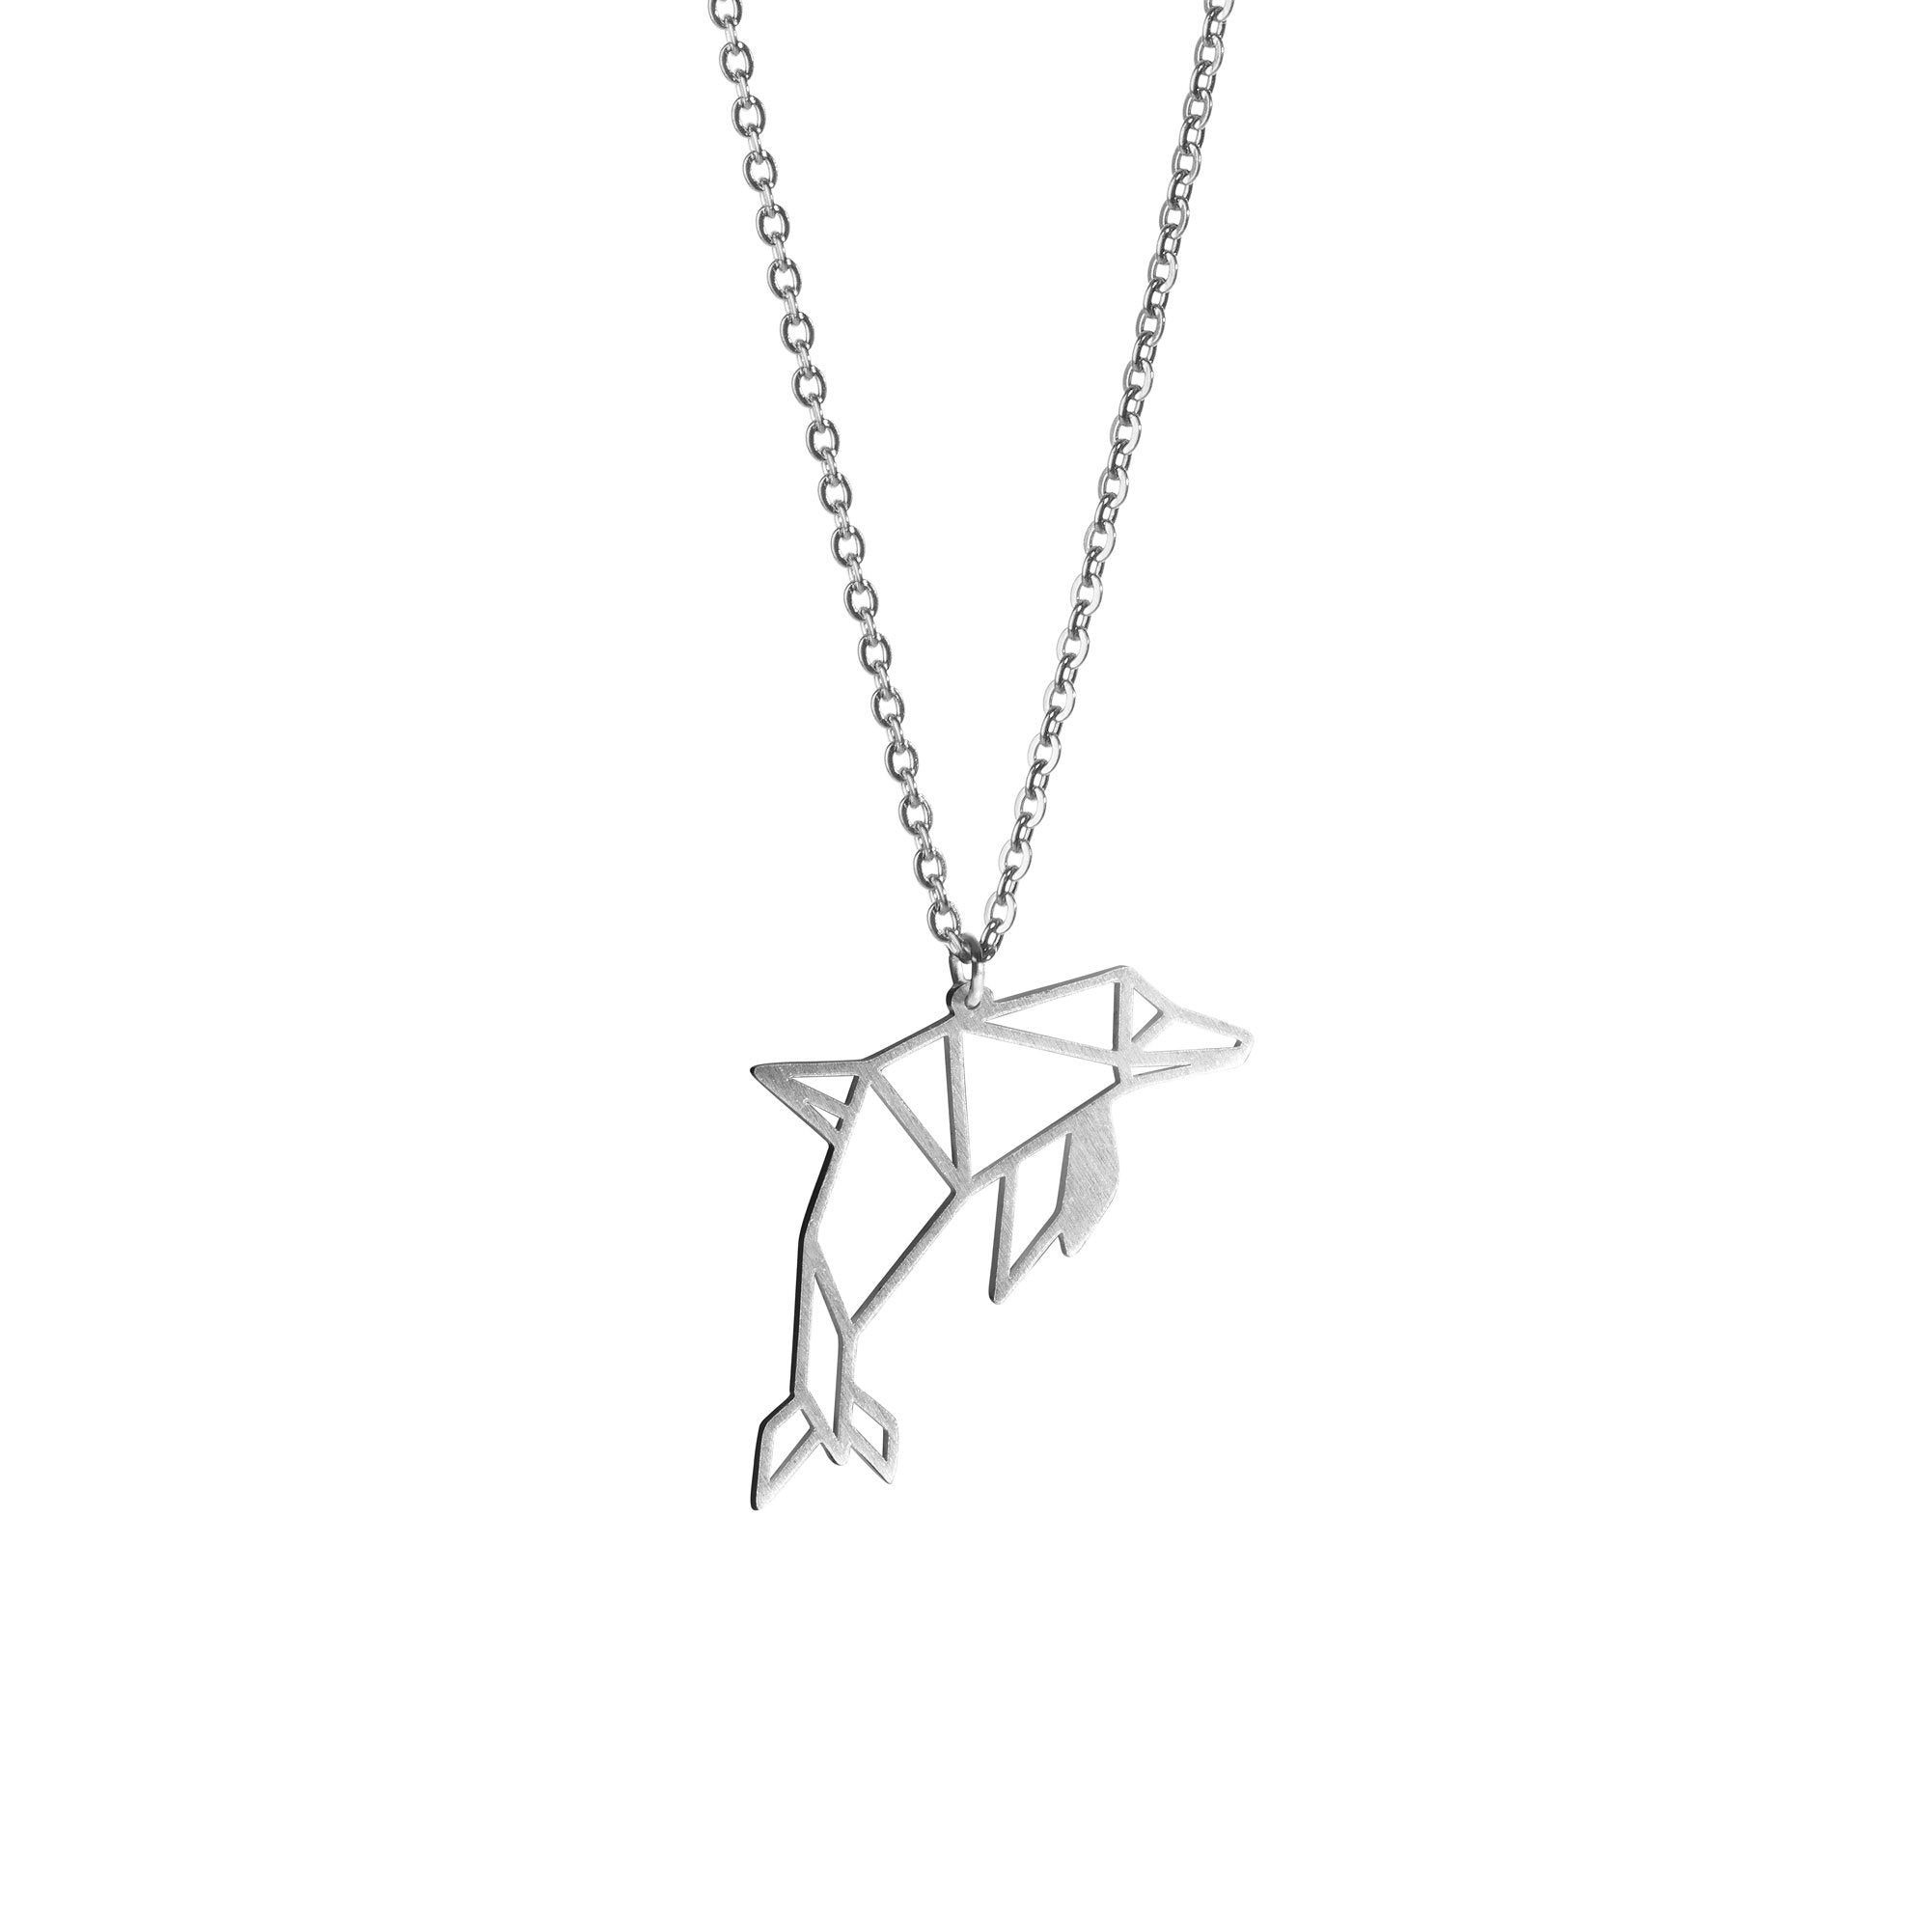 Dolphin Silver Origami Geometric Necklace